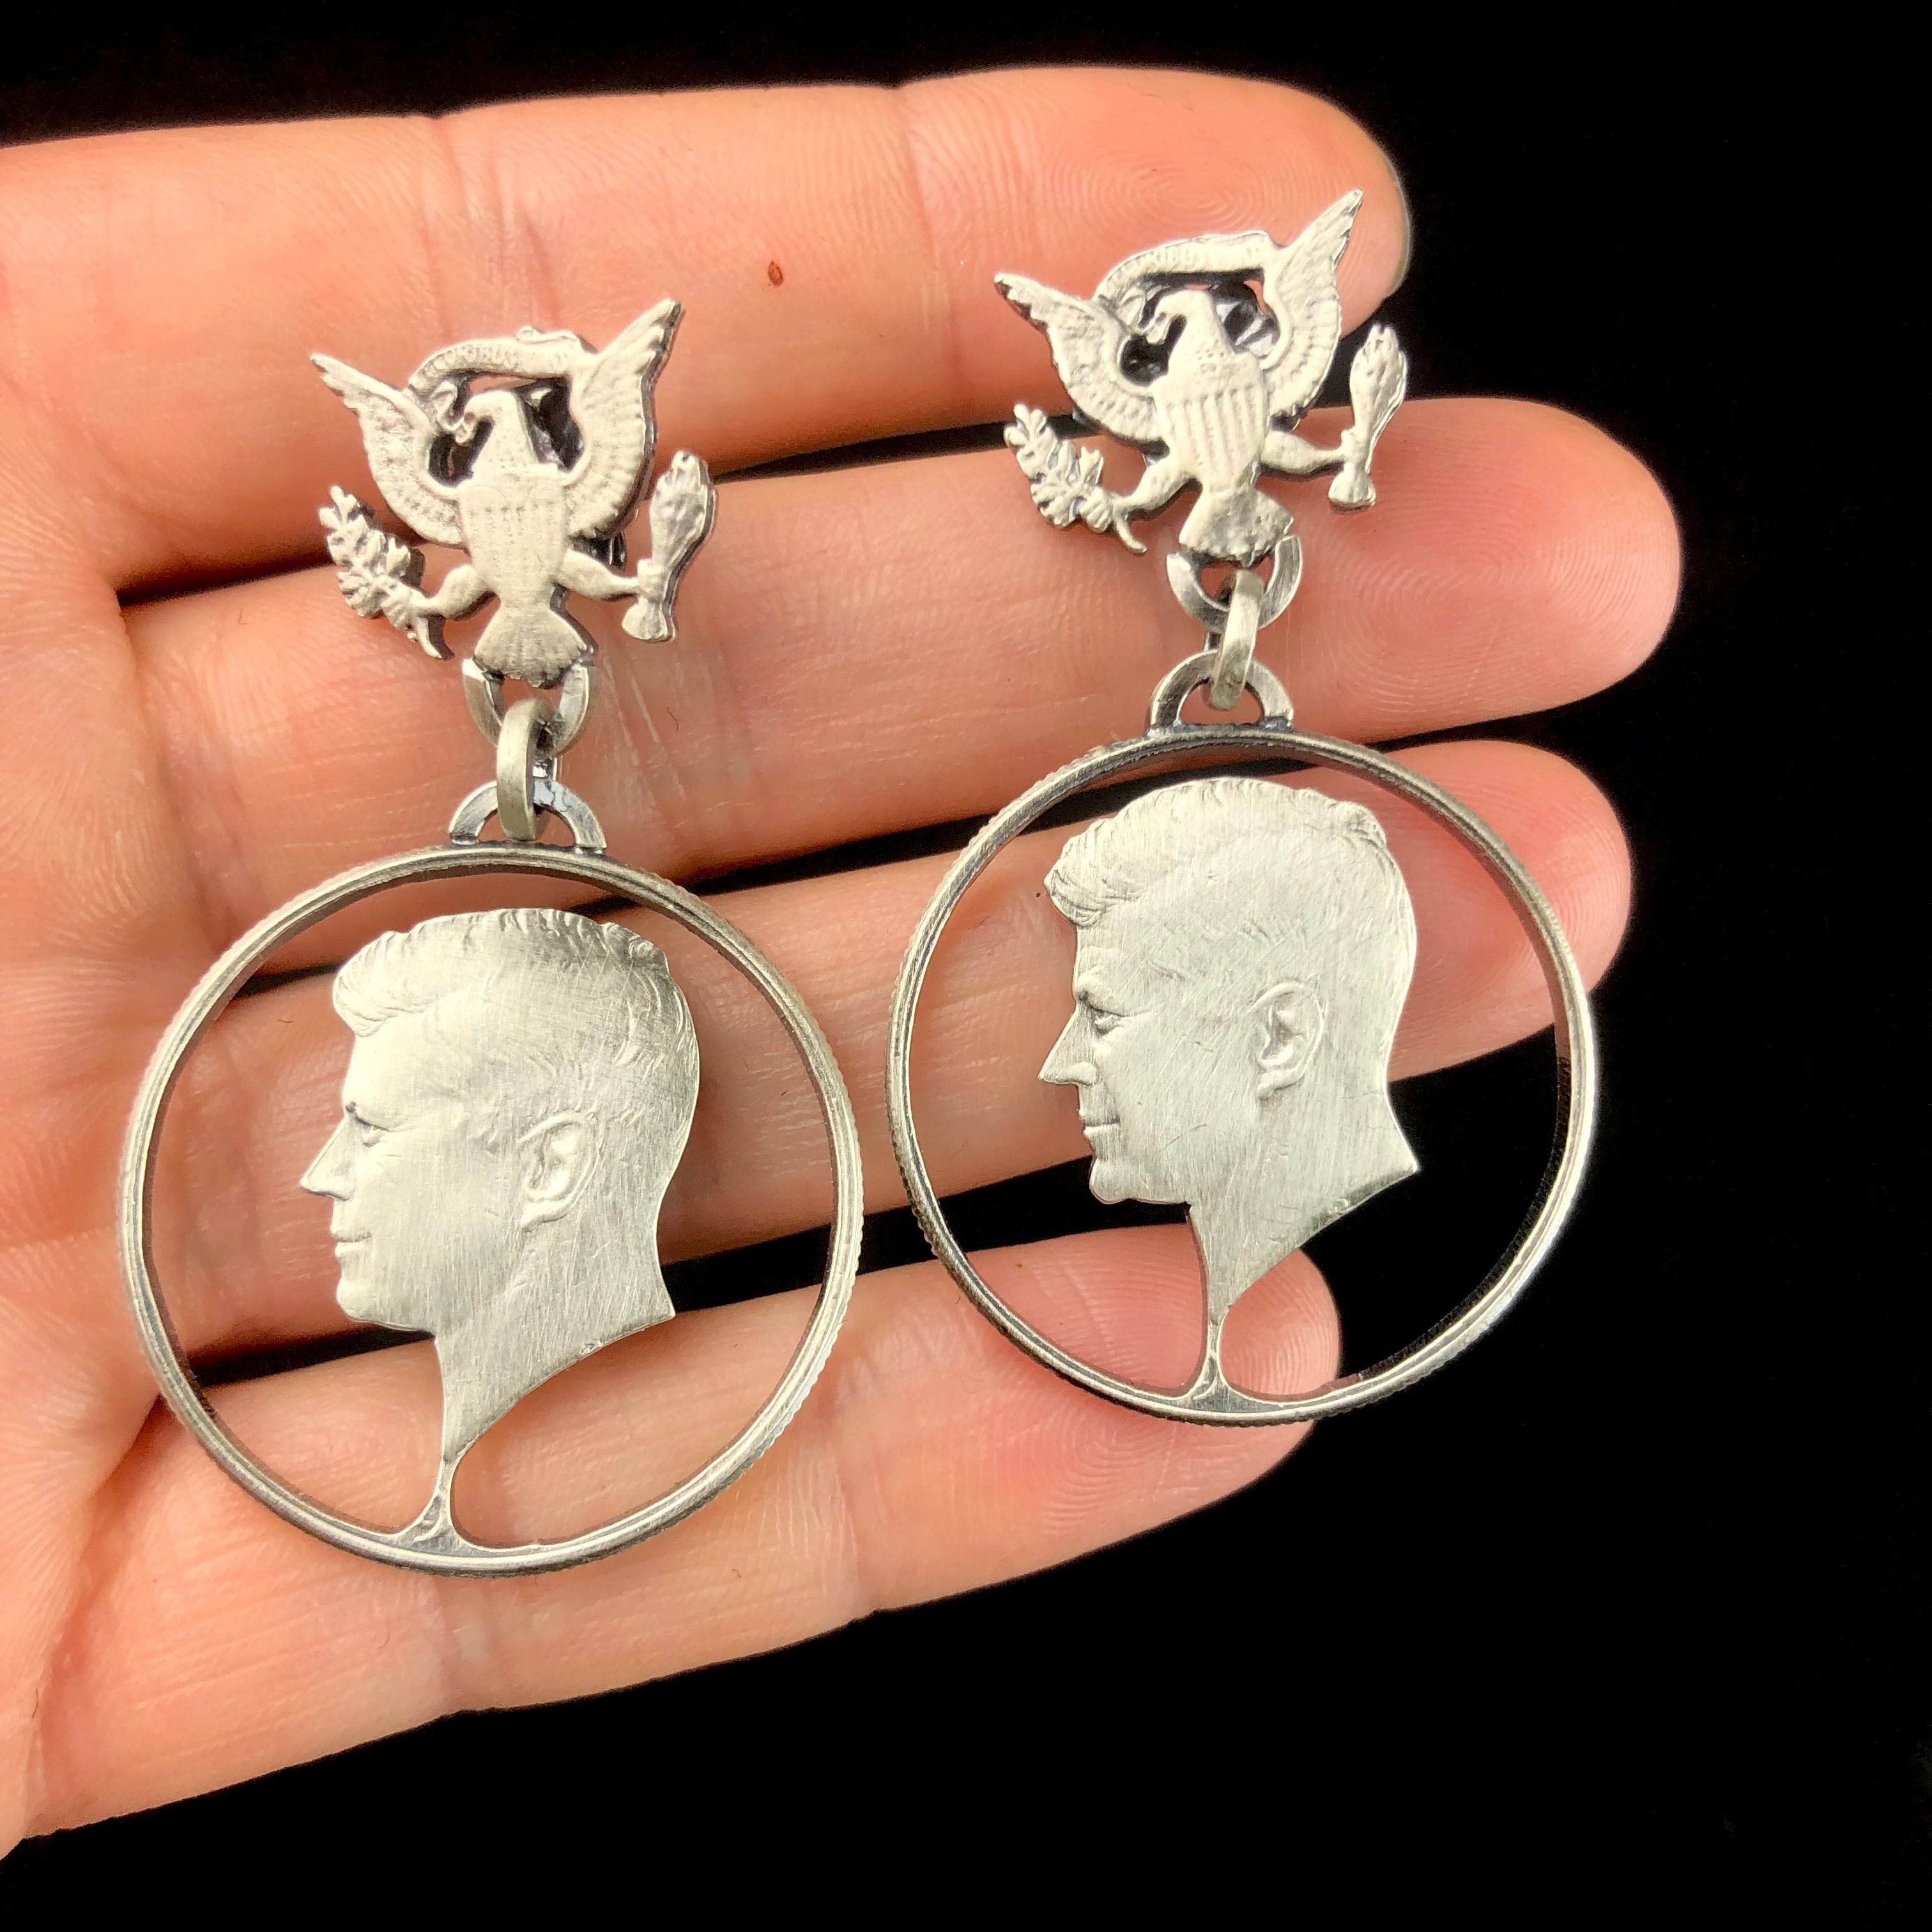 JFK Earrings shown in hand for size reference